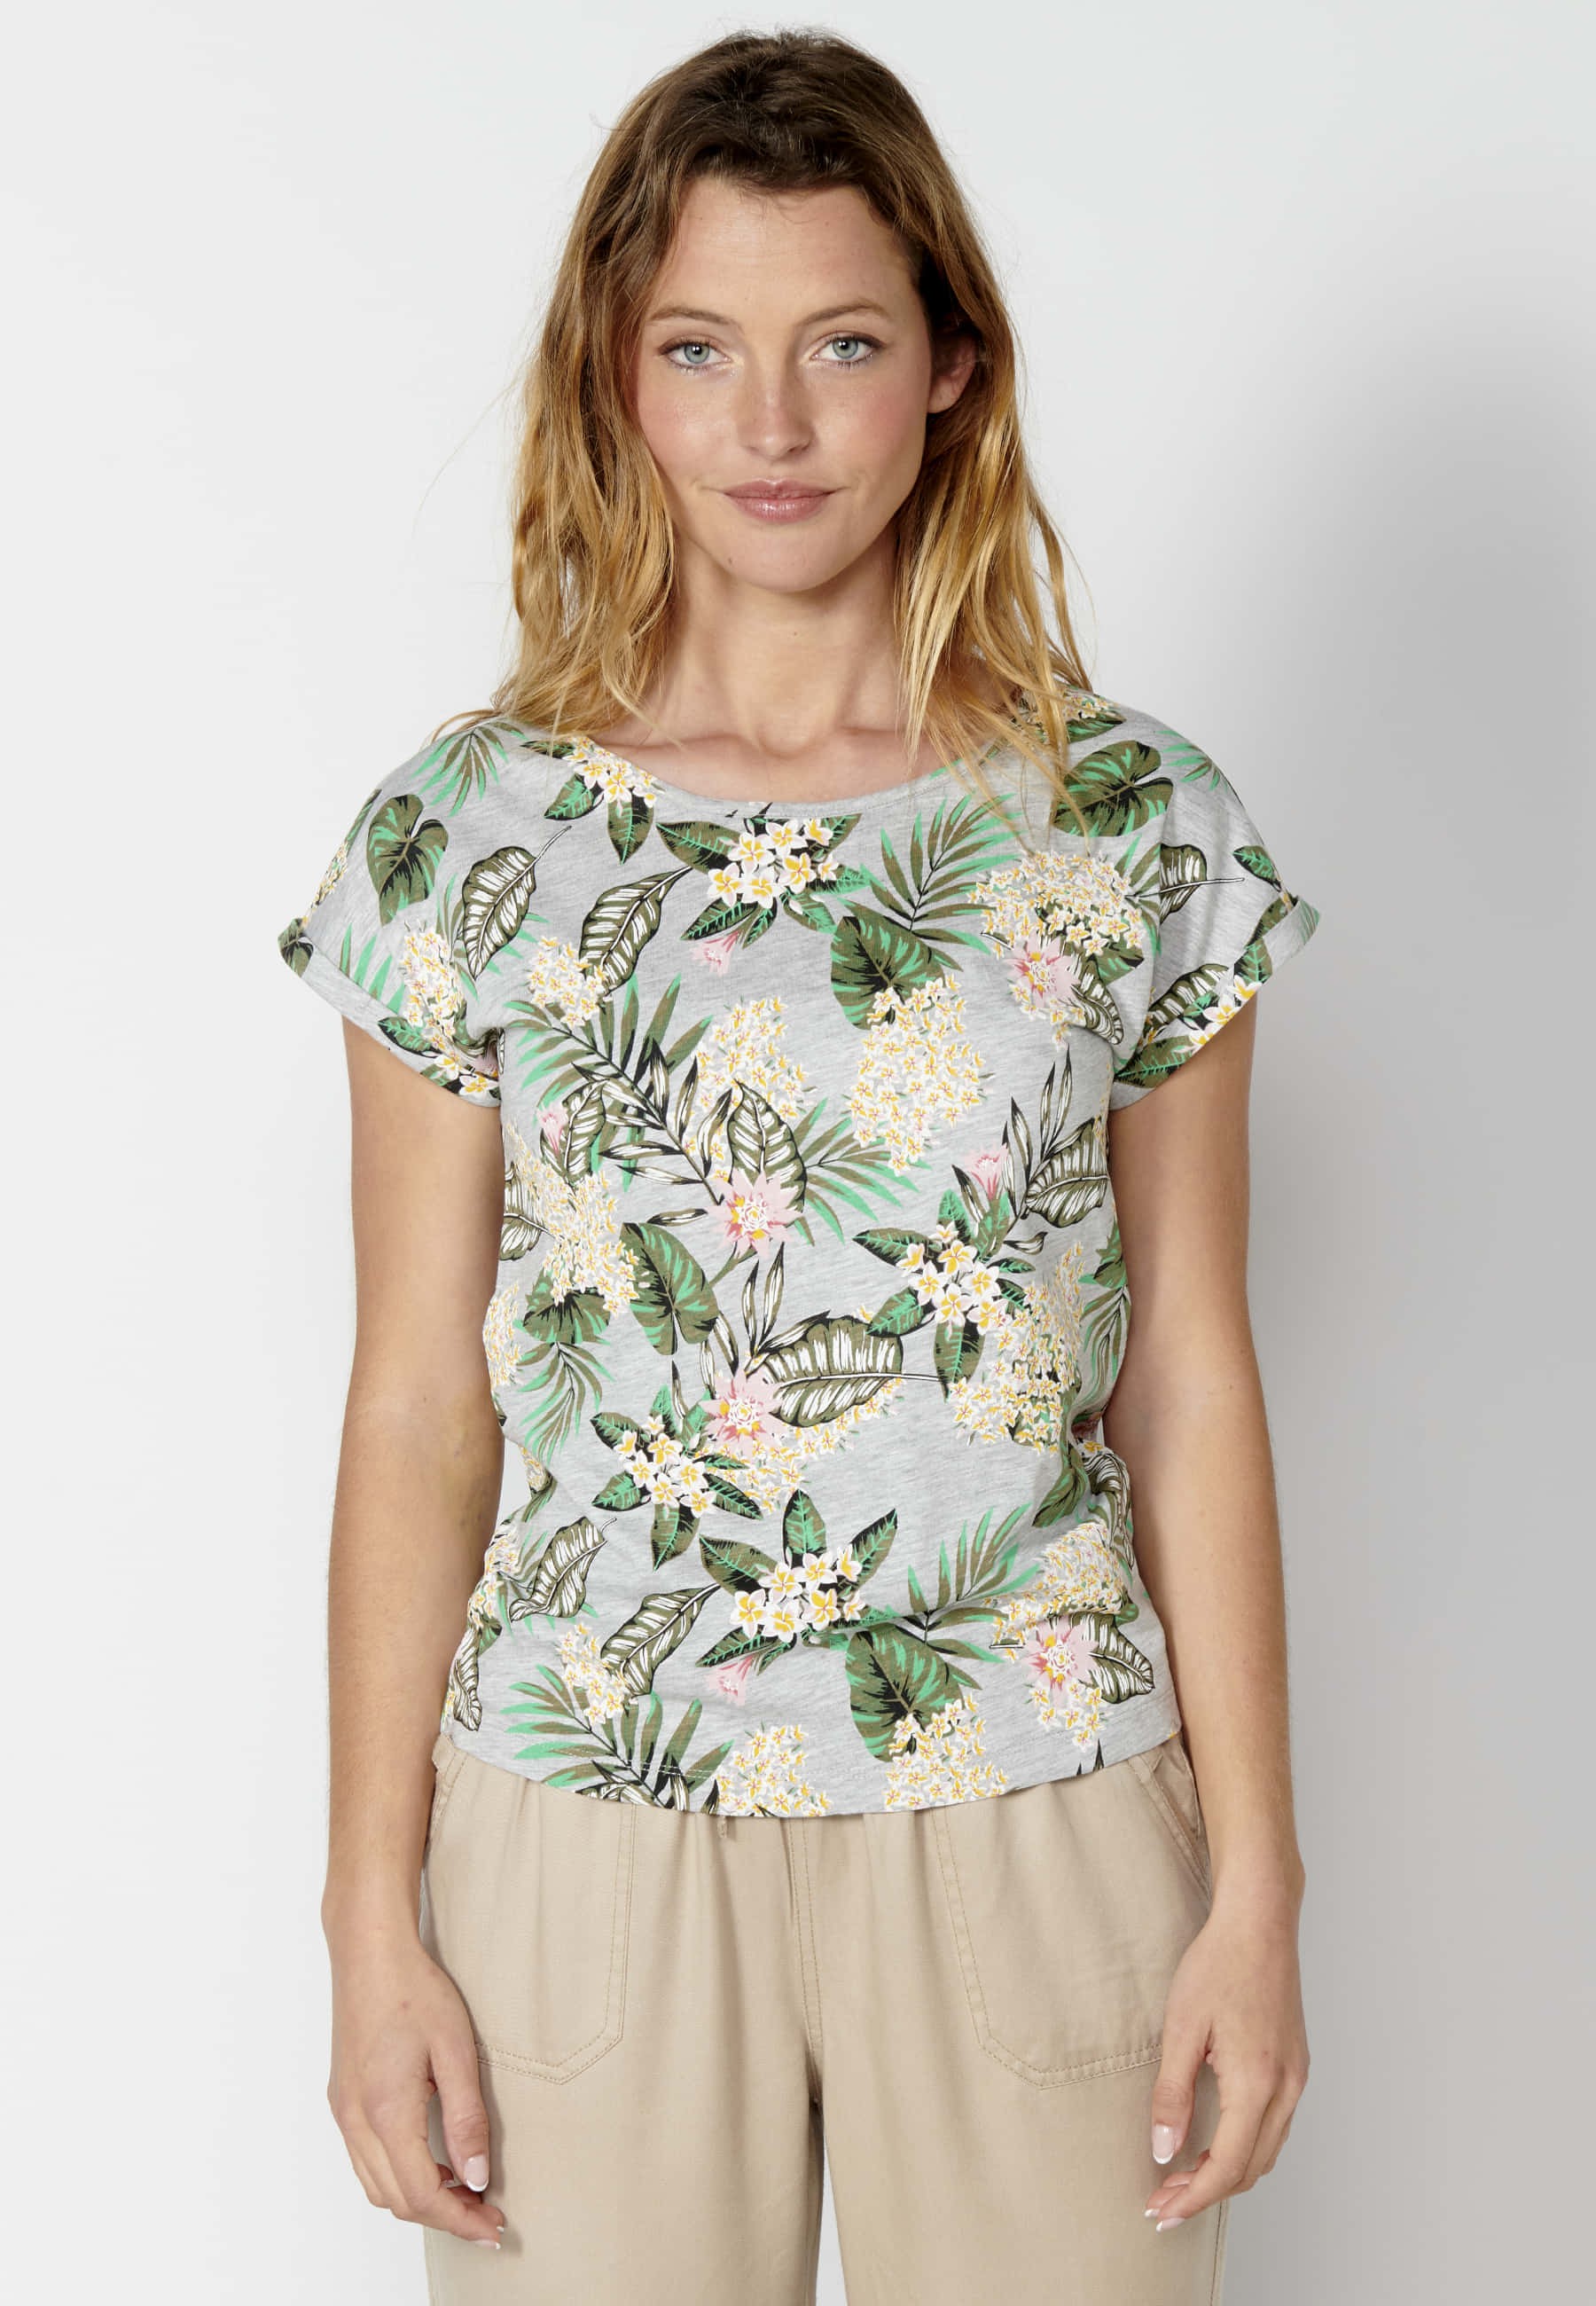 Gray Floral Print Cotton Short Sleeve Top for Women 1